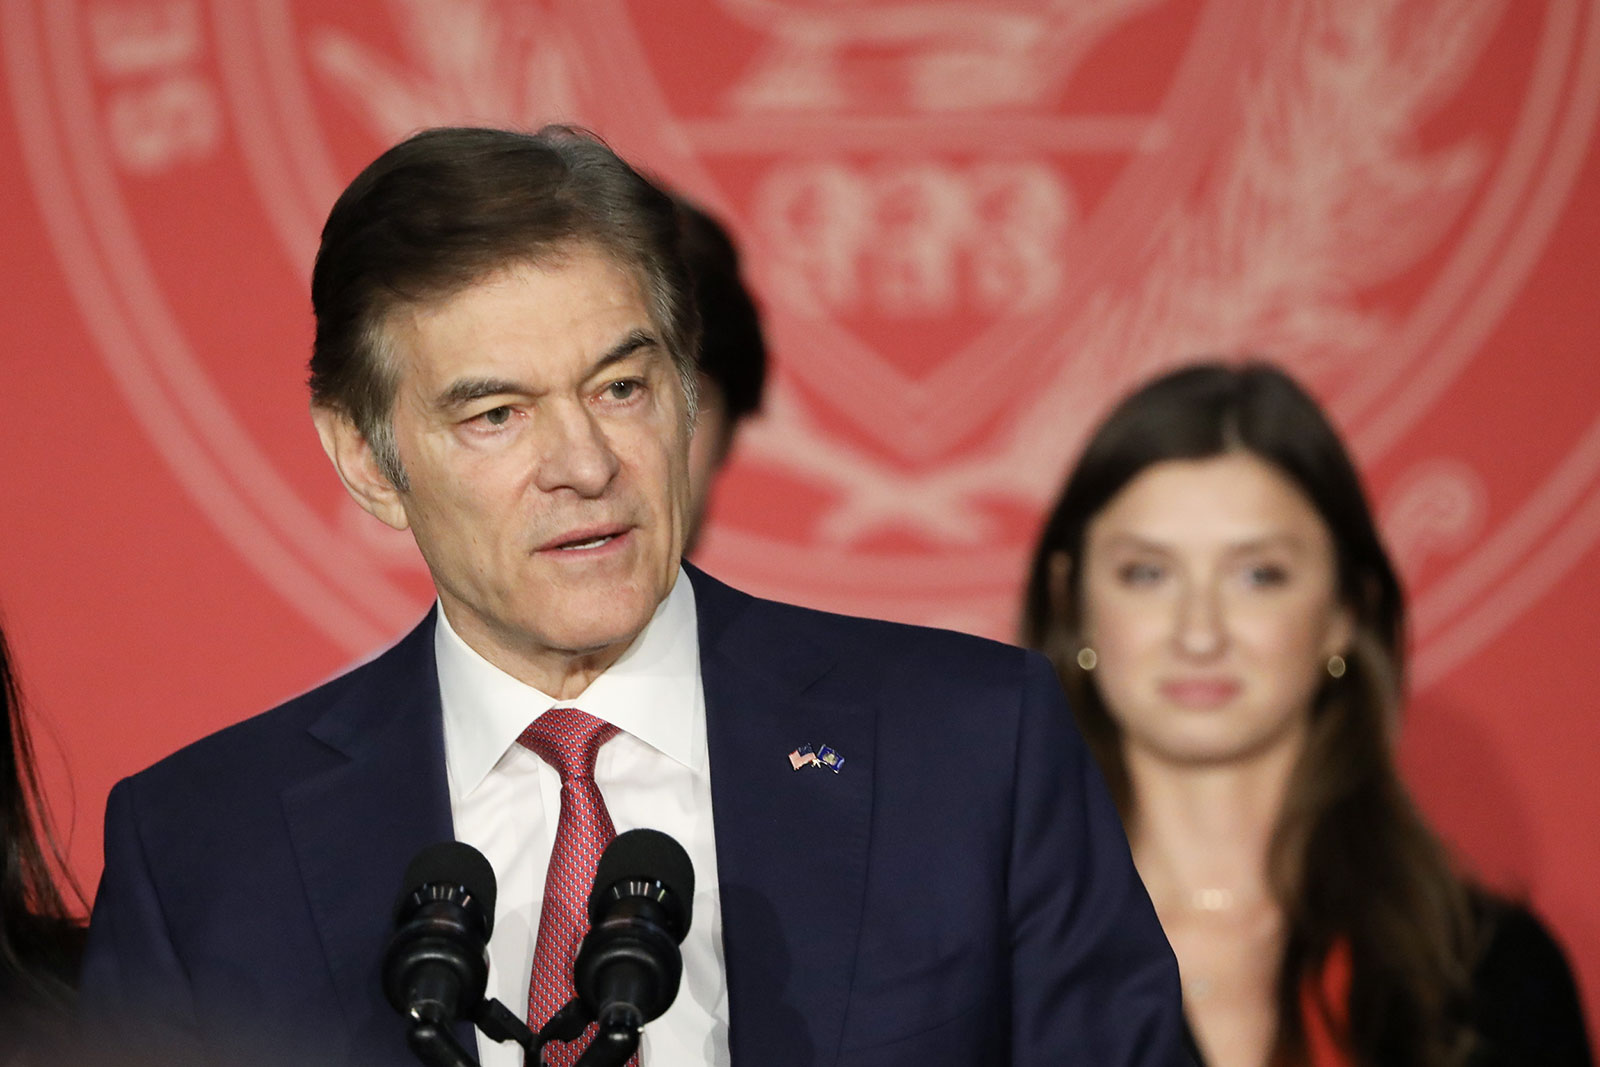 Mehmet Oz speaks during an election night rally in Newtown, Pennsylvania, on Tuesday.